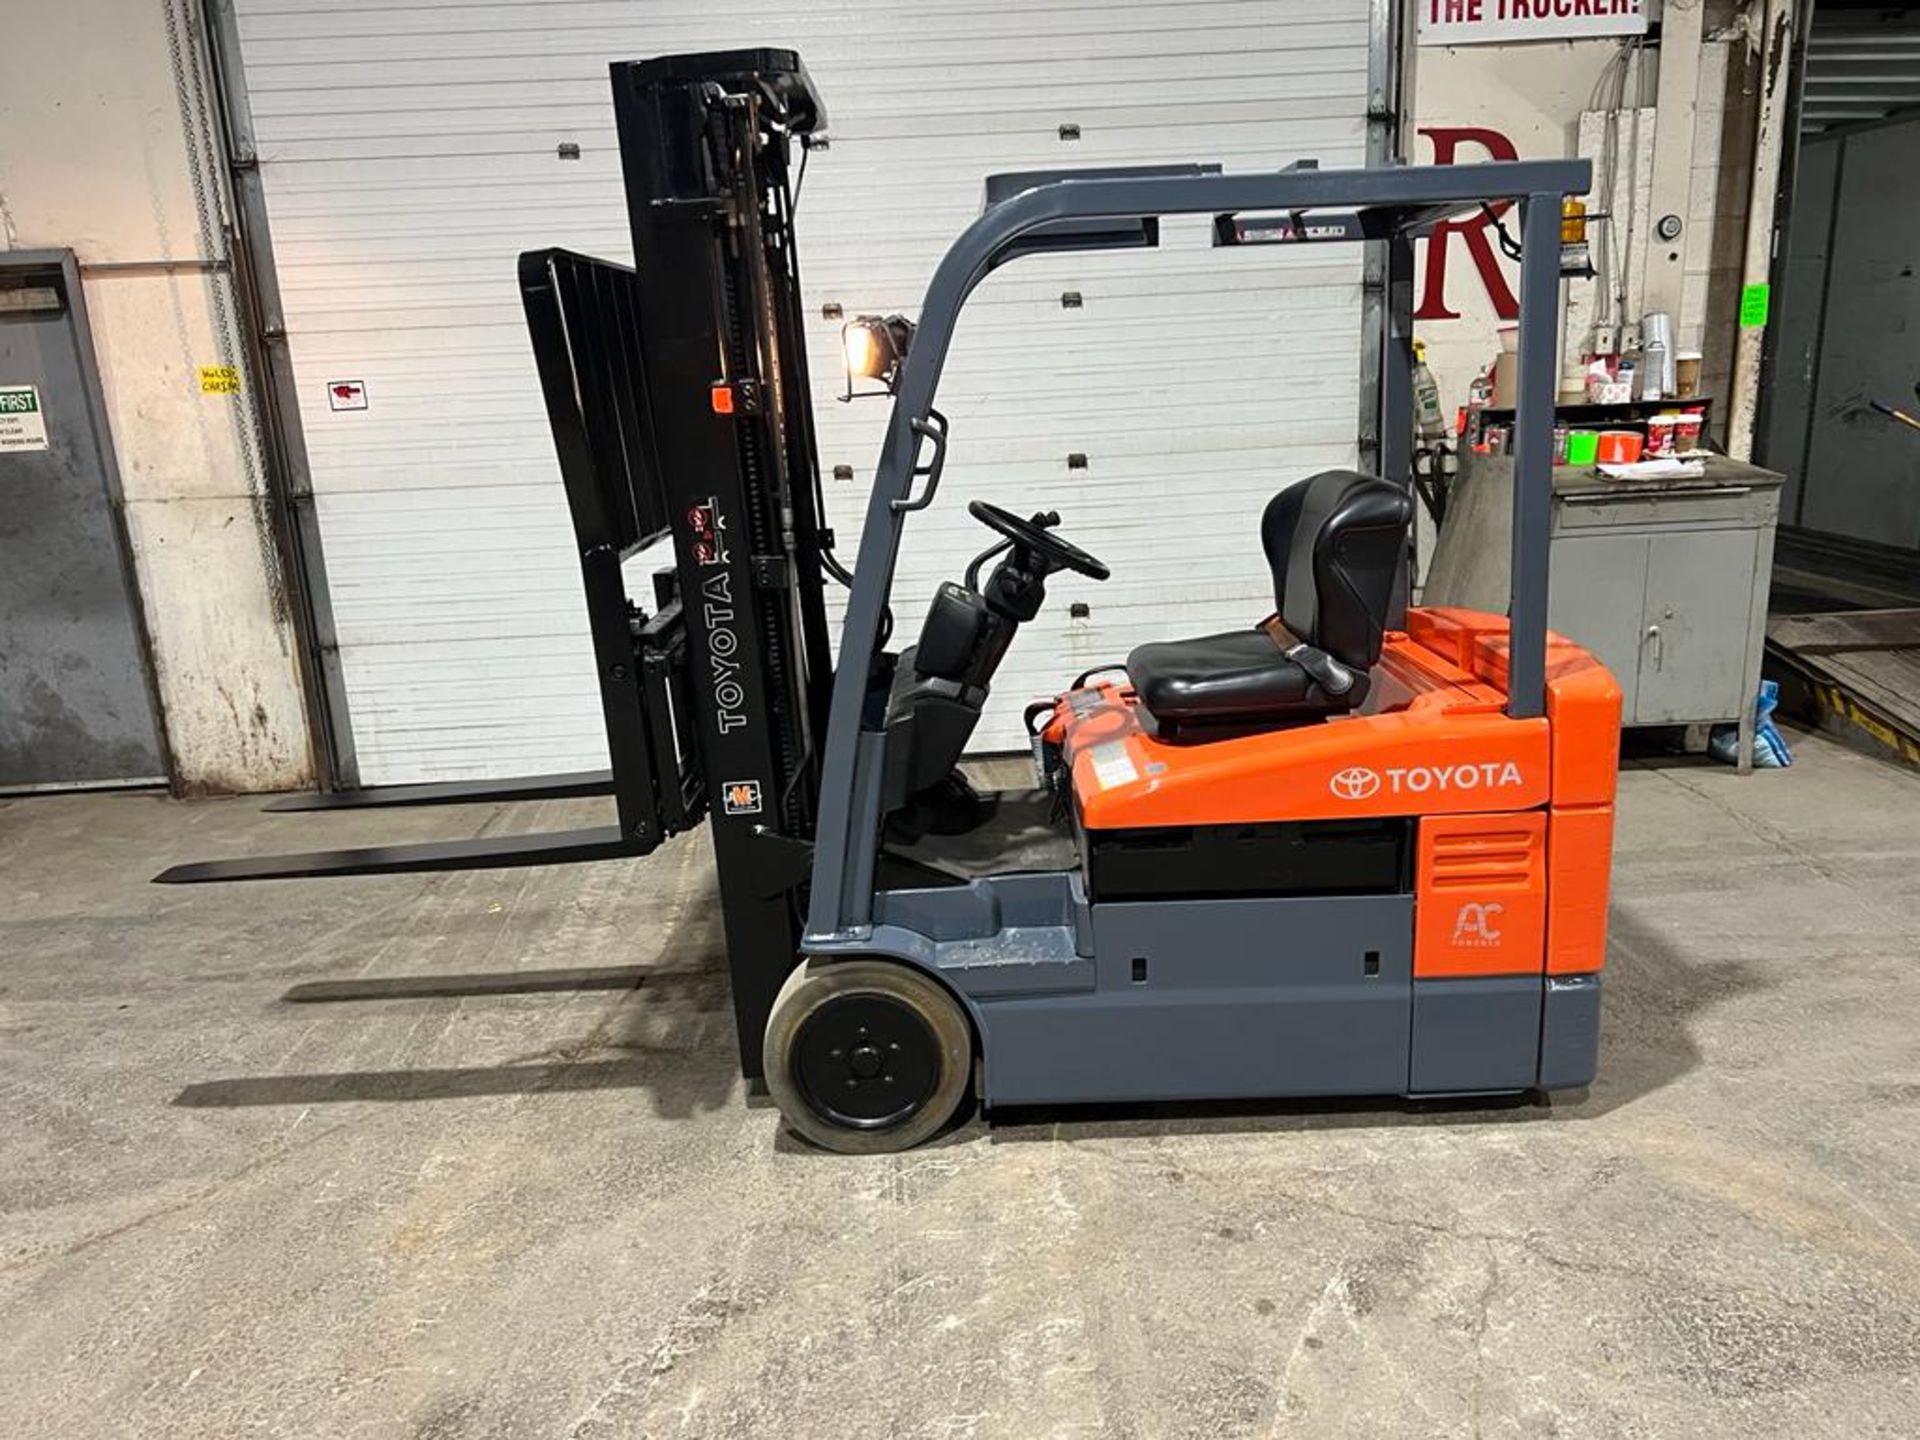 NICE Toyota 3,250lbs Capacity Forklift 3-wheel Electric with SIDESHIFT, 3-stage Mast 36V - FREE